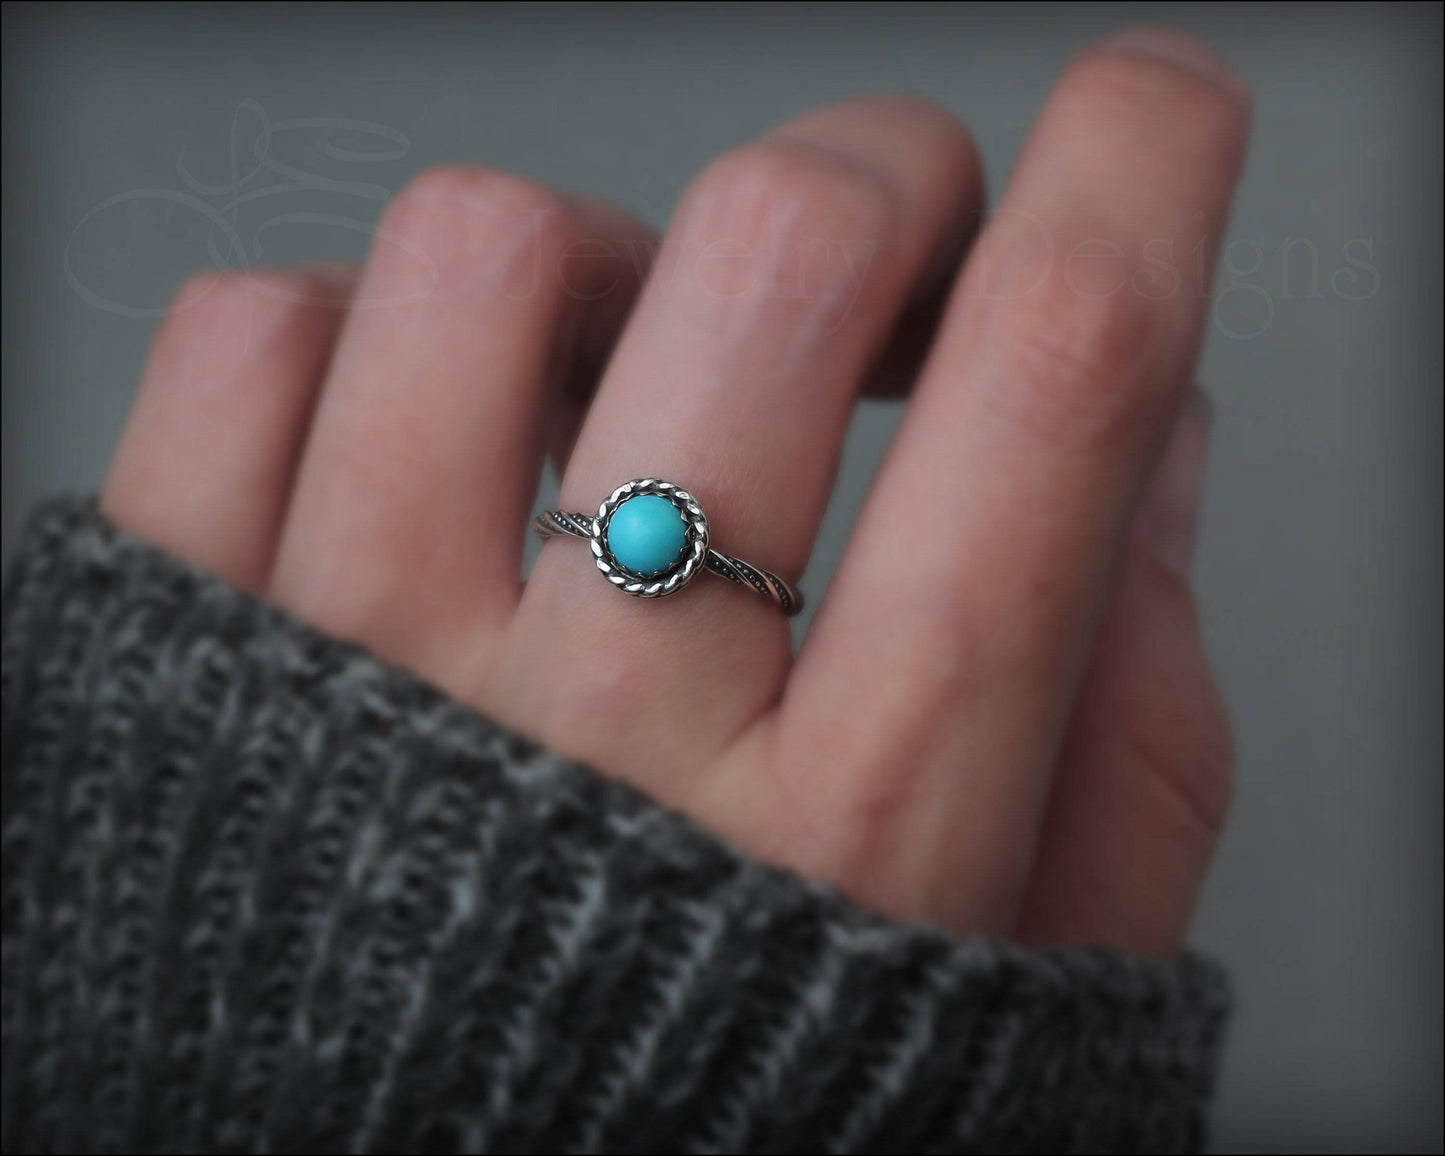 Twisted Sterling Turquoise Ring - LE Jewelry Designs